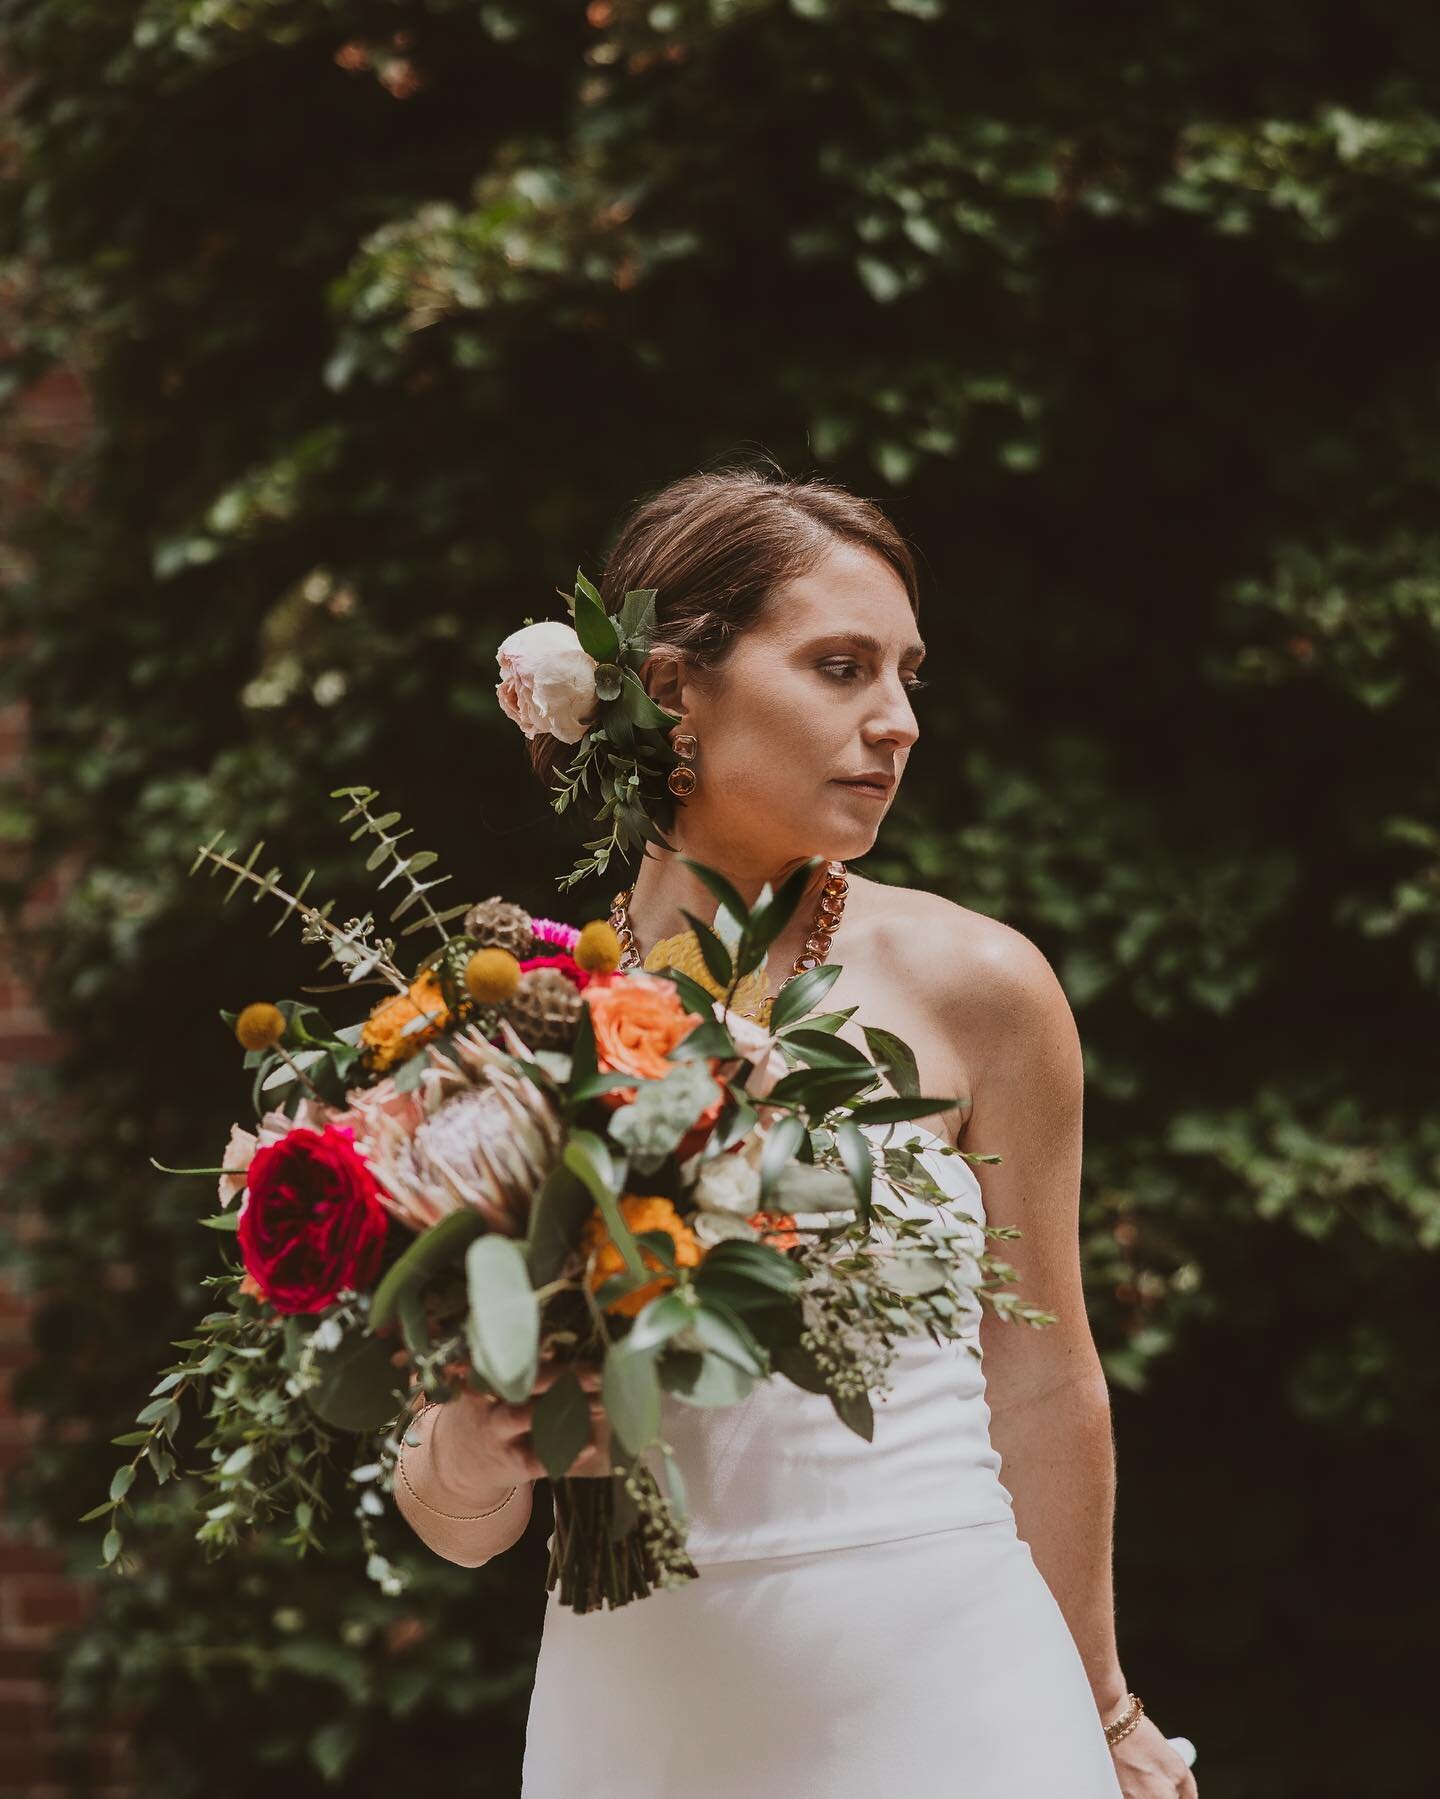 A pop of tropical, a couple in love, and Nicole&rsquo;s magnificent cape. No better way to start a Tuesday.

Photographer: @hotmetalstudio 

#greensinner #pghflorist #pittsburghflorist #wesanderson #wedding #pghwedding #pittsburghwedding #floraldesig